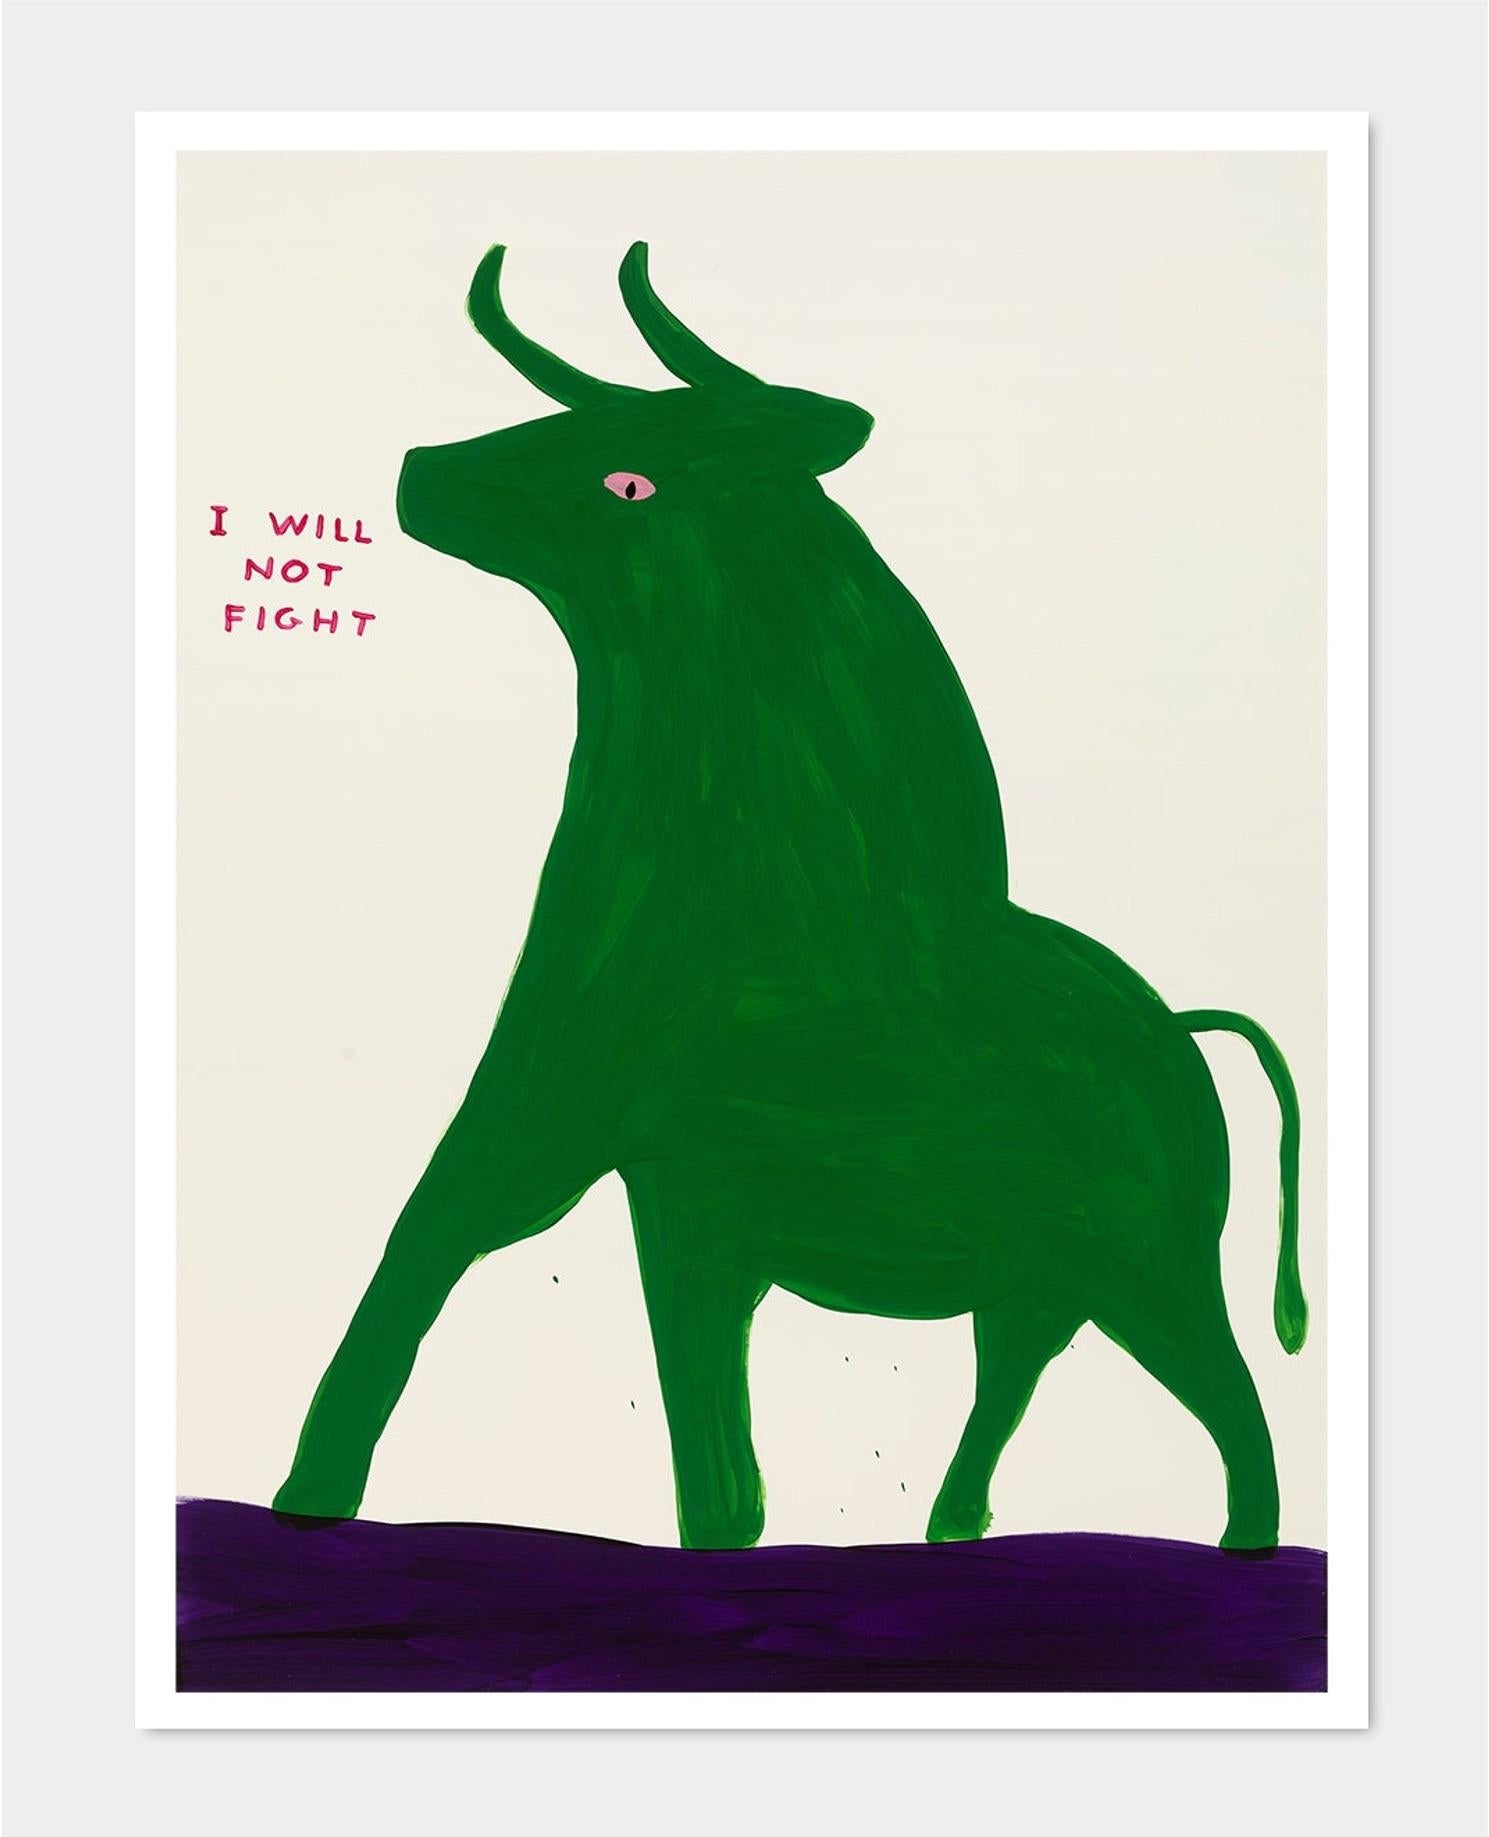 David Shrigley
Untitled (I Will Not Fight) (2019)
80 x 60 cm
Off-set lithography
Printed on 200g Munken Lynx paper